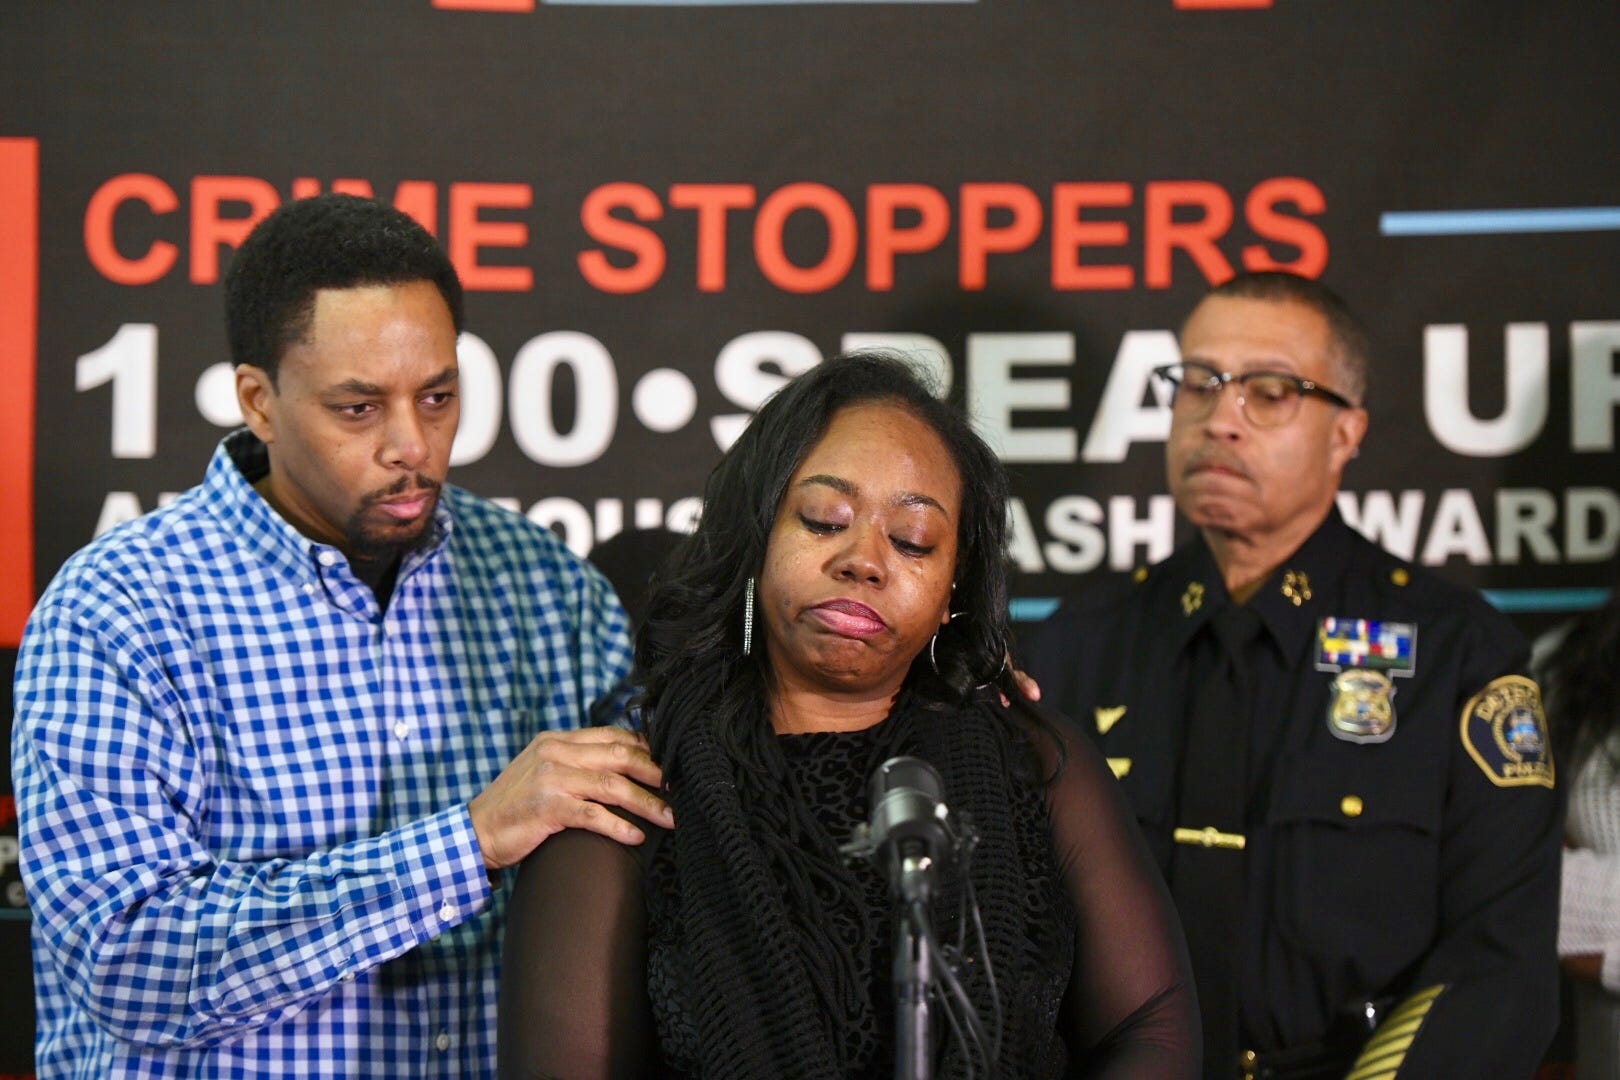 Richard Miller and Tomika Whitley talk about their son, 3-year-old Christian Miller,  during a press conference at Crime Stoppers of Michigan in Southfield, Monday. Christian was killed in a drive-by shooting.